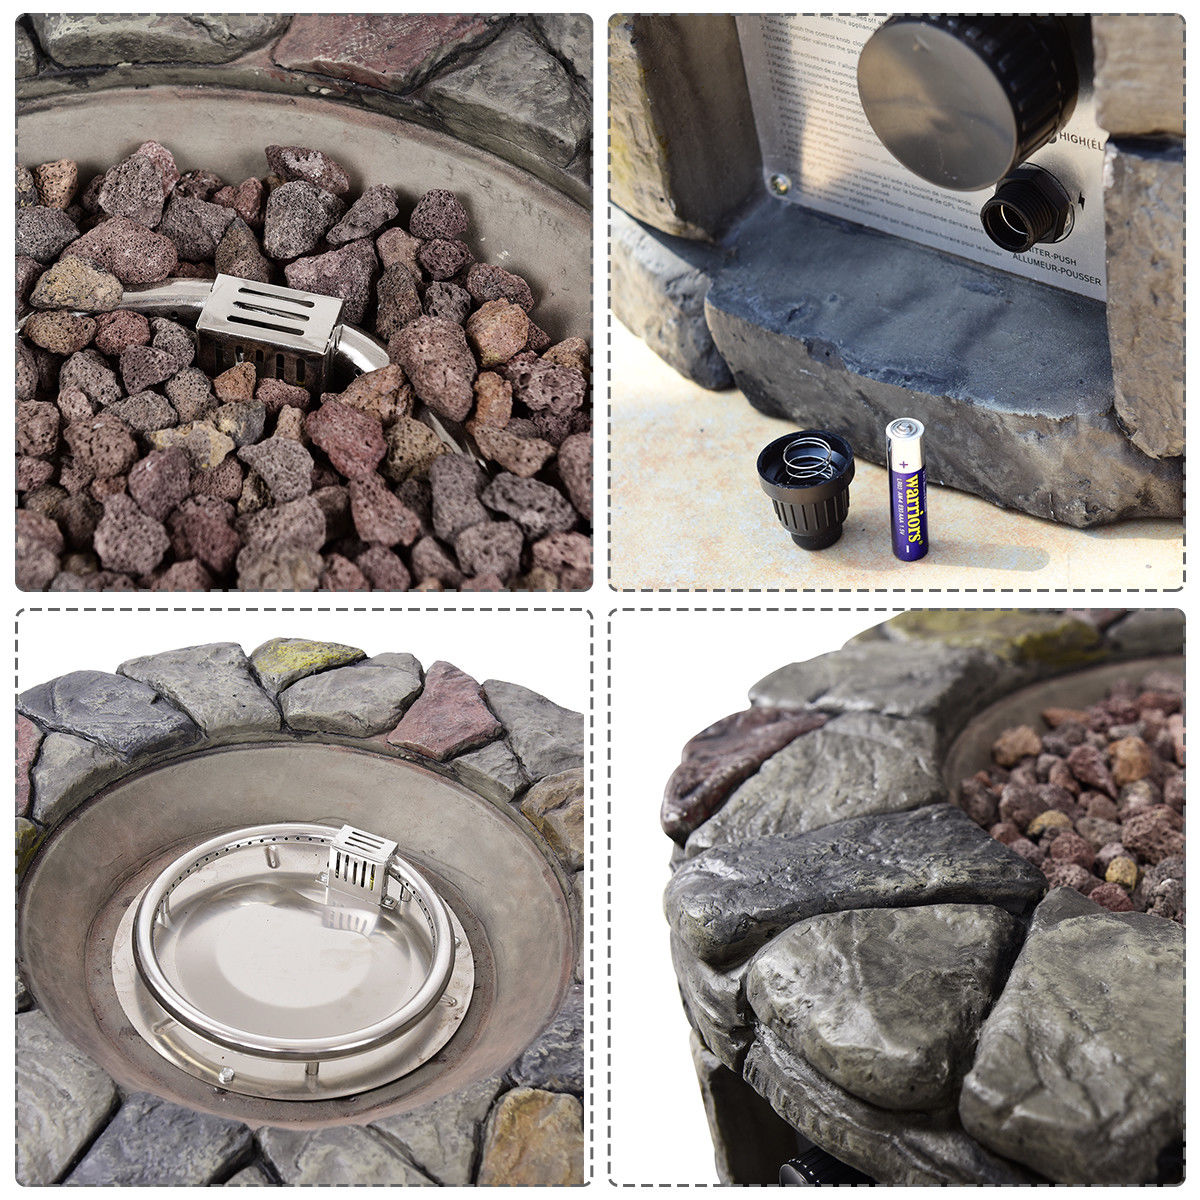 28 Inch 40,000 BTU Propane Fire Pit Outdoor w/Natural Stone Brown Stainless-Steel Gas Burner w/Electronic Ignition Lava Rock ETL Certification Giantex Gas Fire Pit Cover 